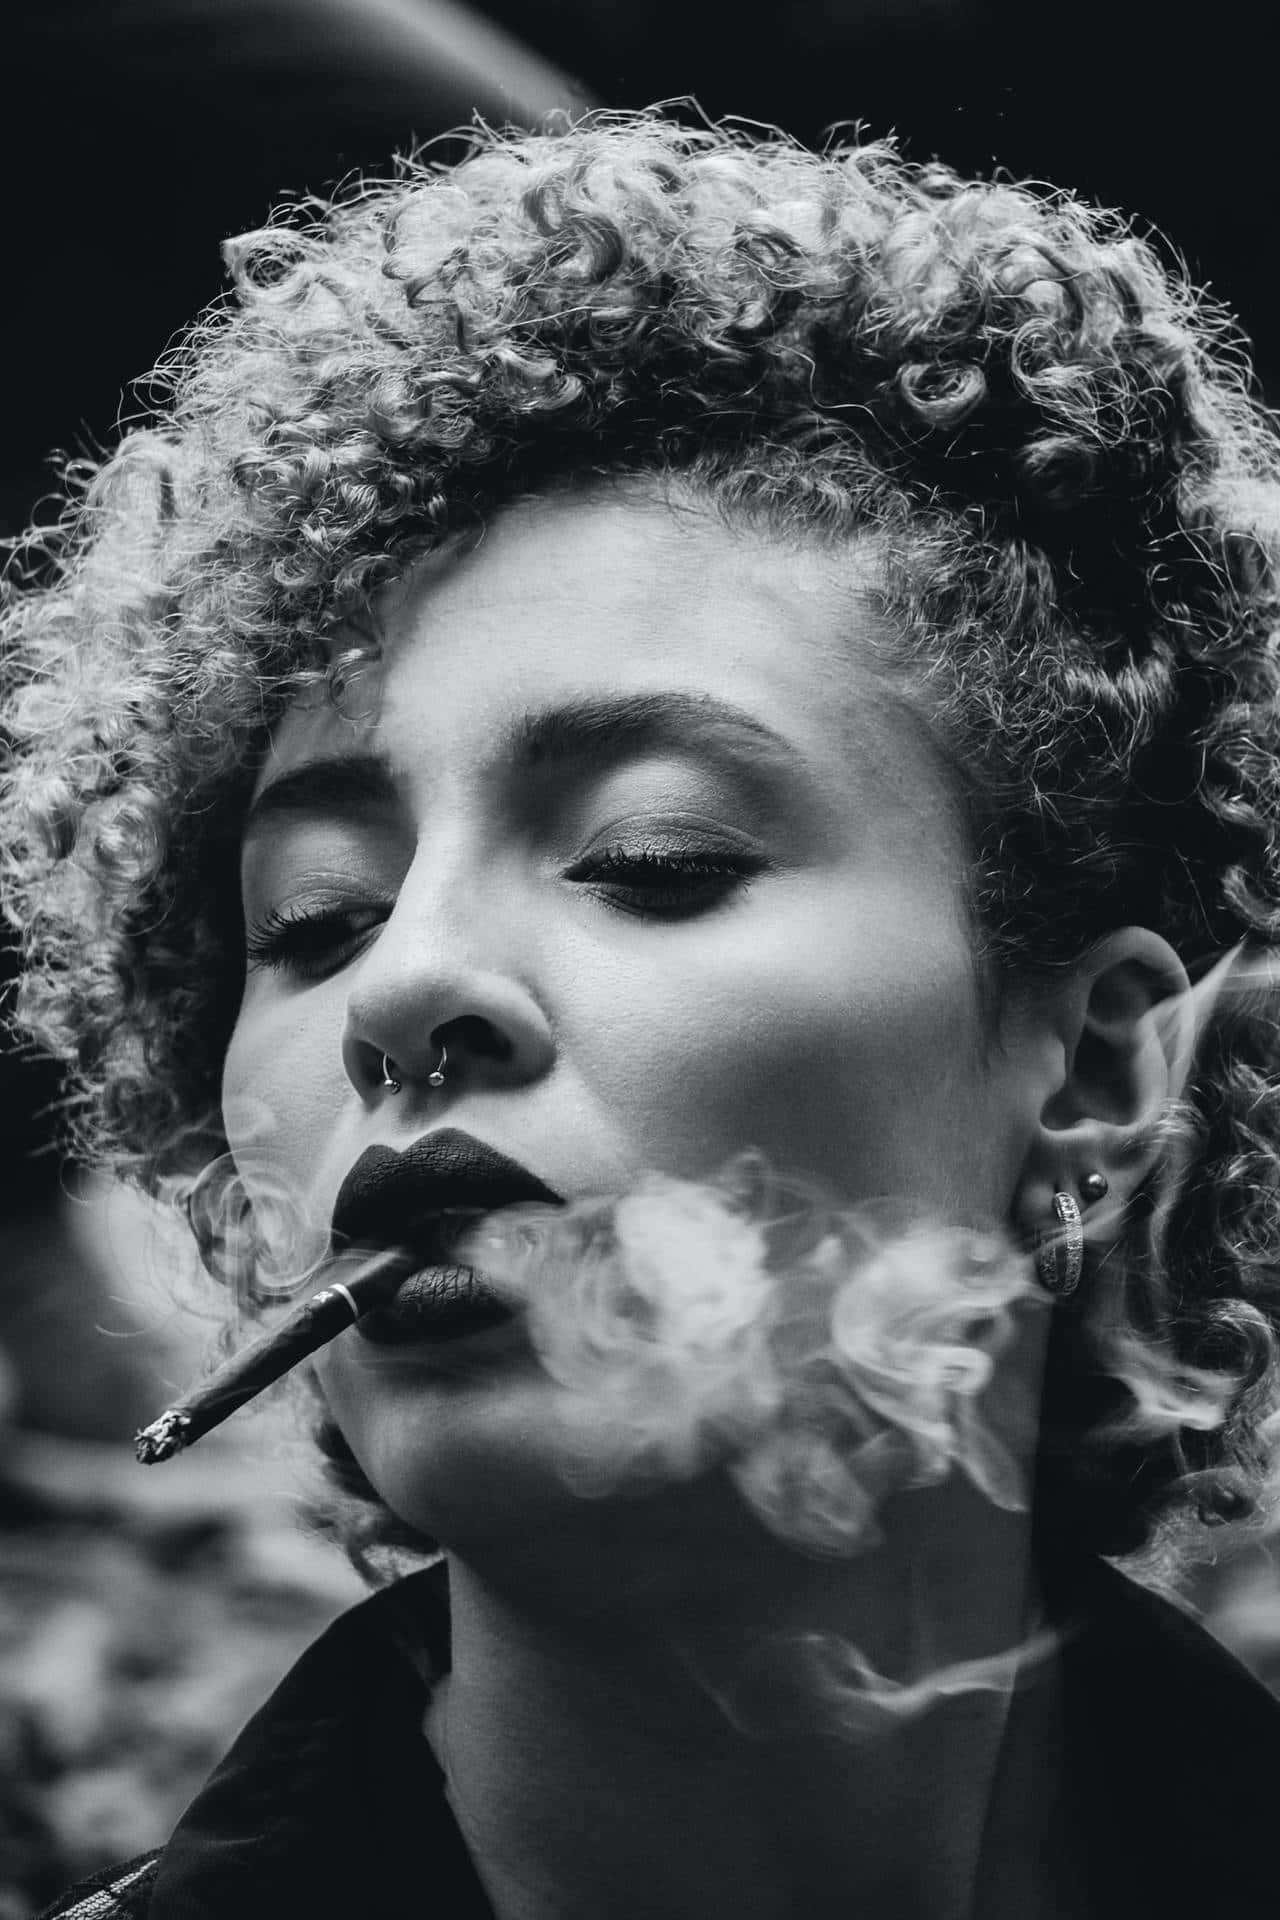 A Carefree Young Woman With Curly Hair Enjoying A Serene Moment With Her Cigarette